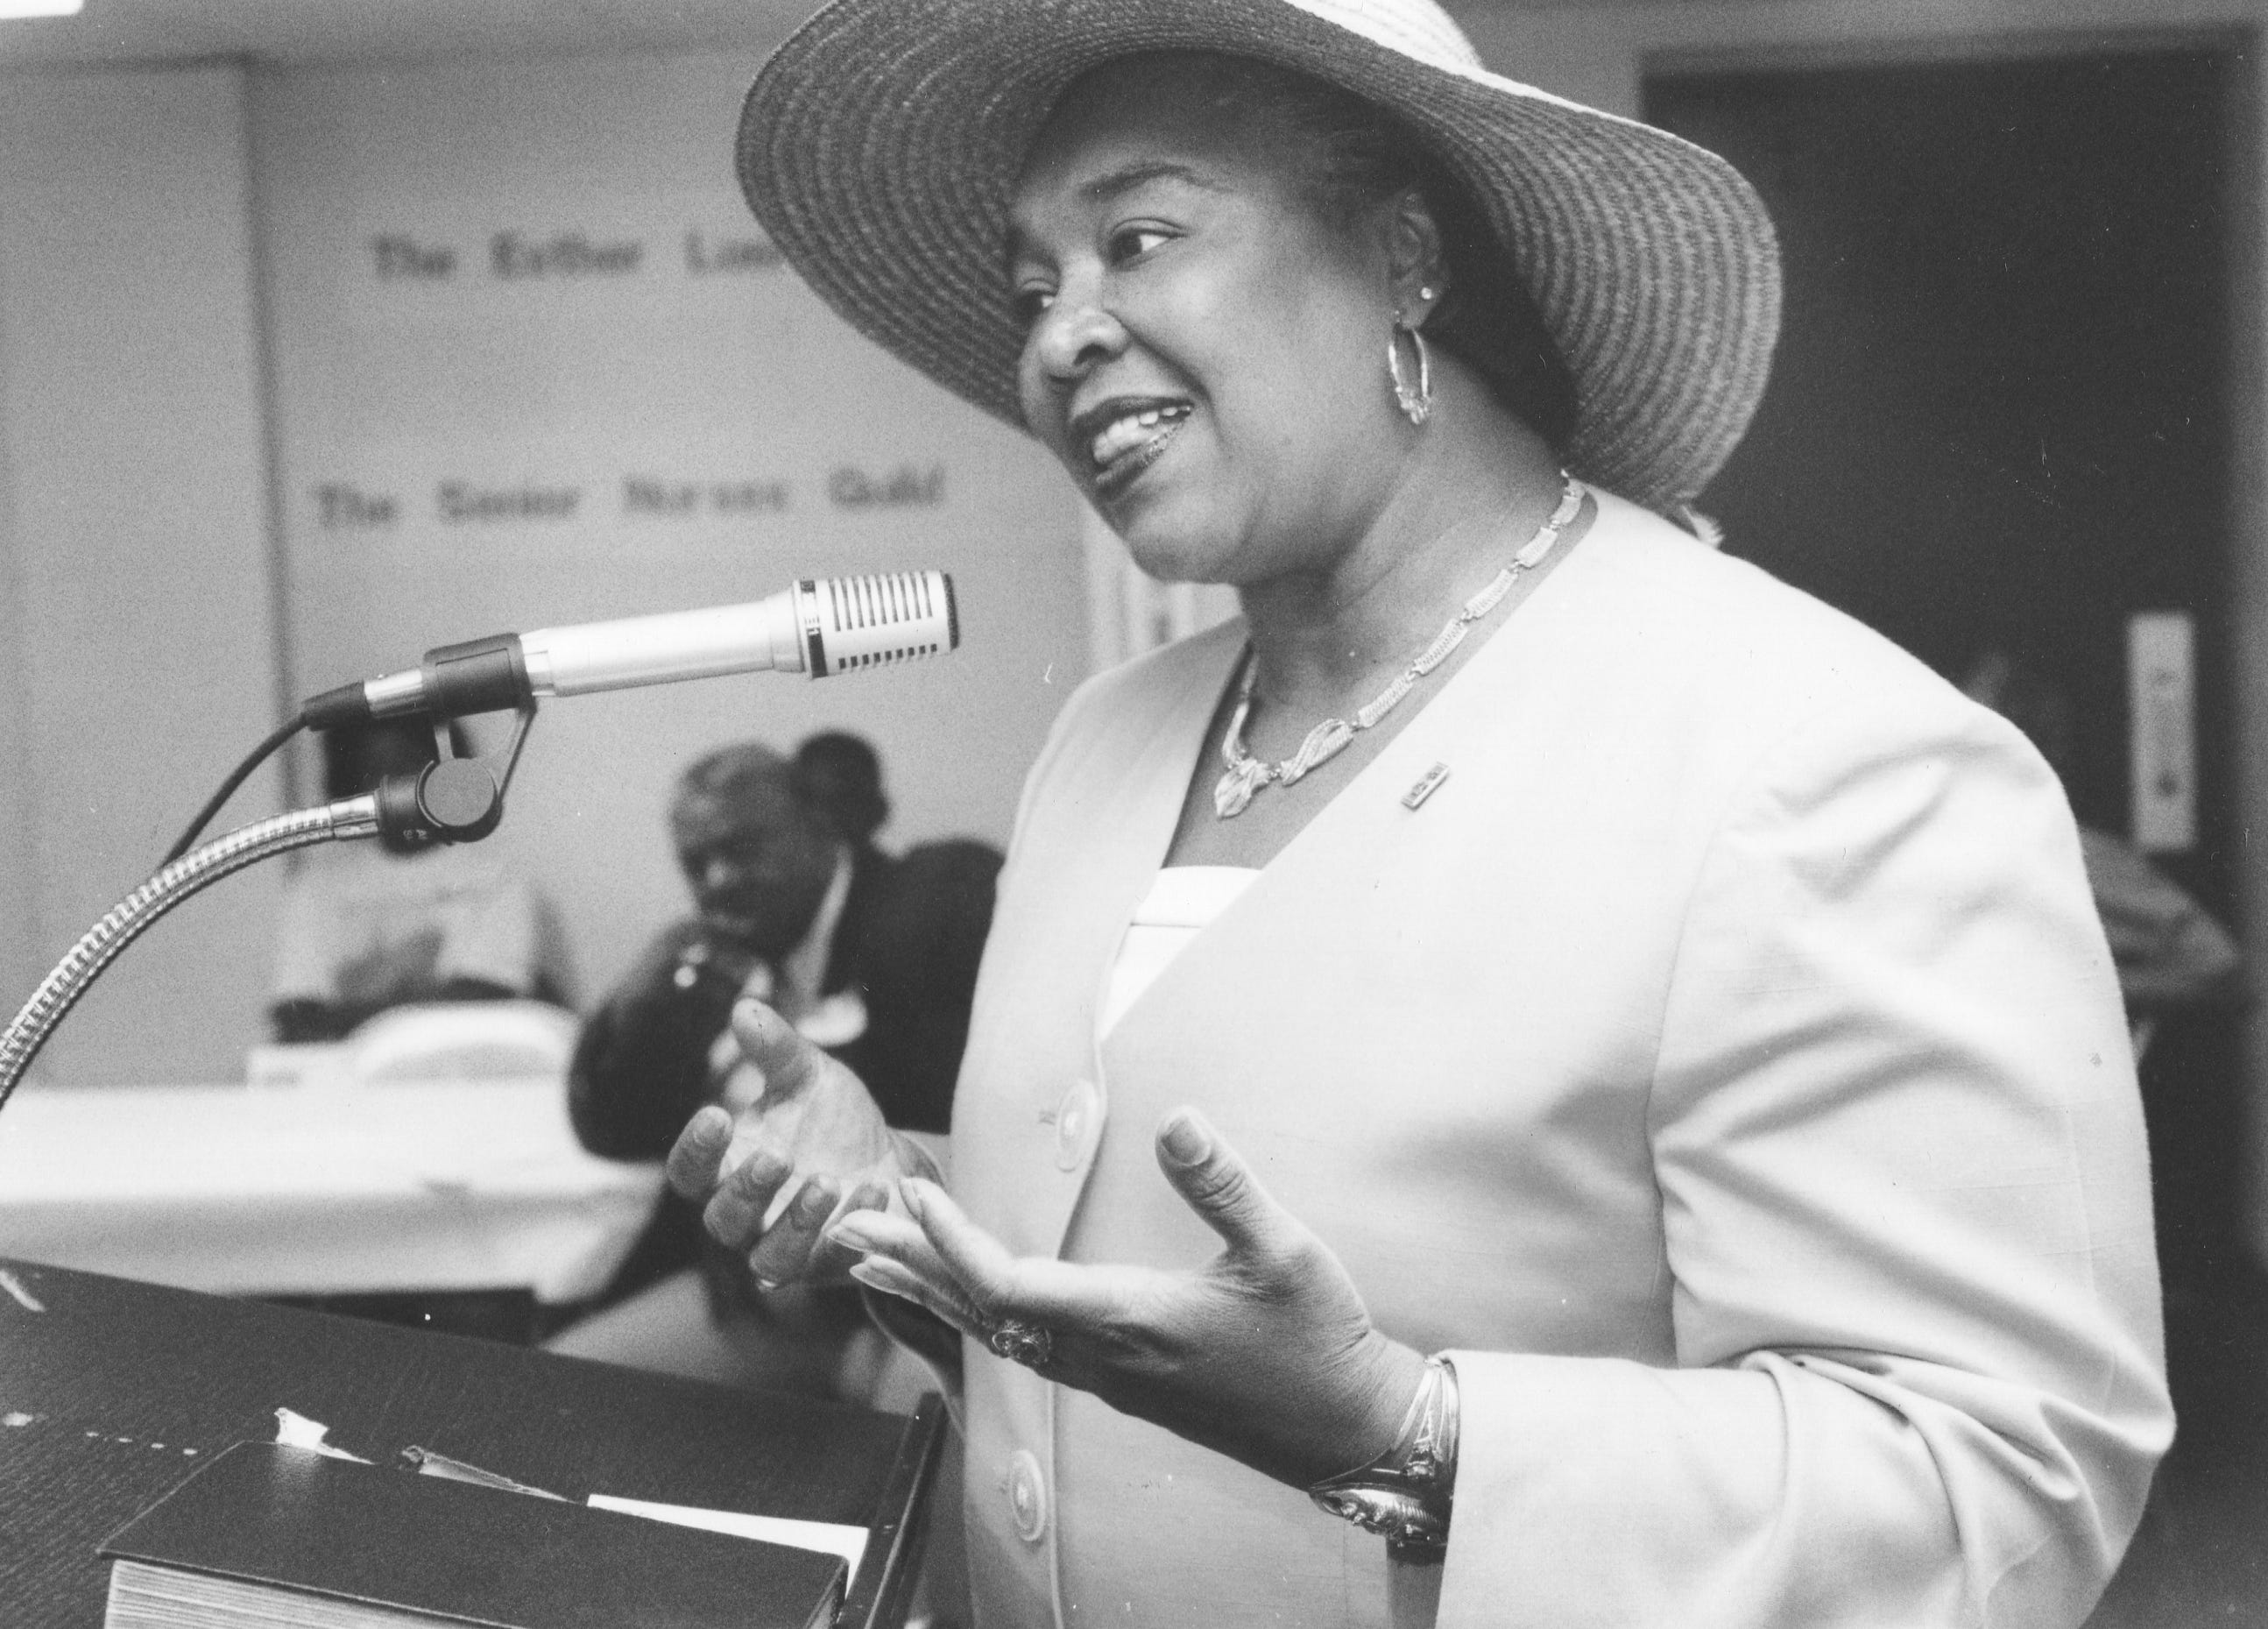 Longtime community activist and Detroit congresswoman Barbara-Rose Collins, seen here in a July 25, 1992 photo, died at the age of 82, her family announced in a statement on Thursday, Nov. 4, 2021. Collins was elected to the U.S. House in 1990, becoming the first Black woman from Michigan elected to Congress.